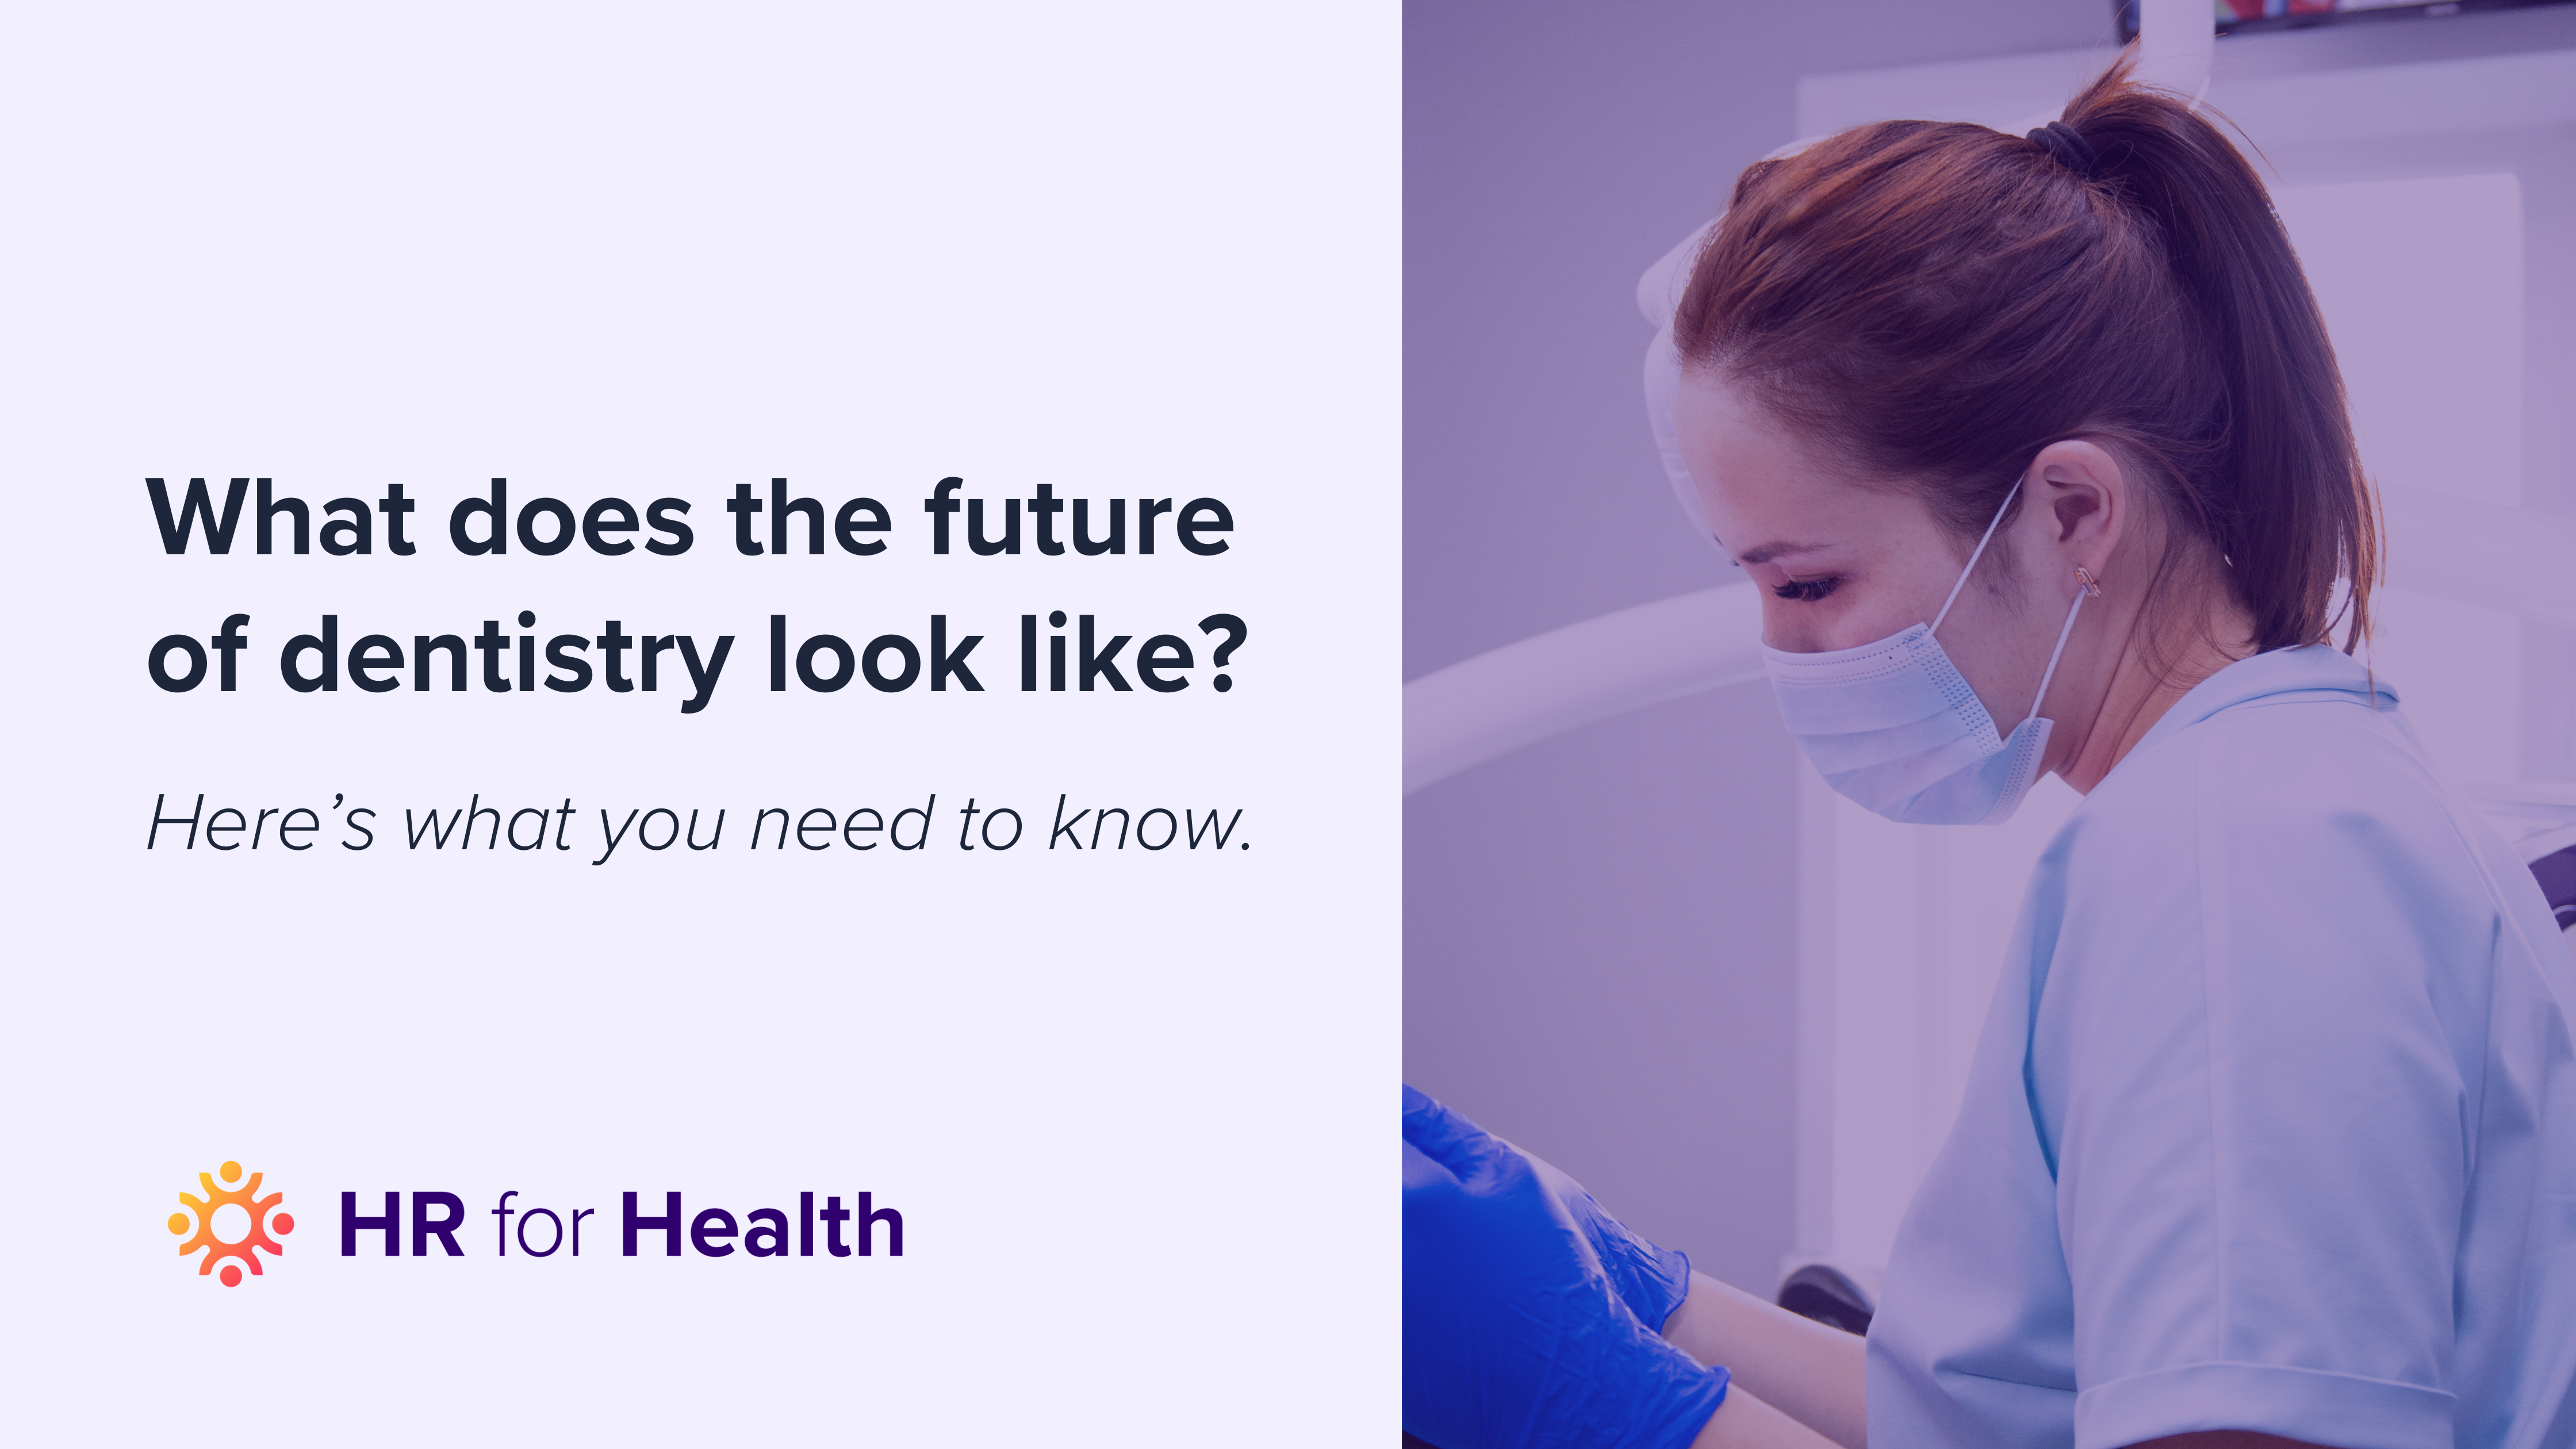 What does the future of dentistry look like